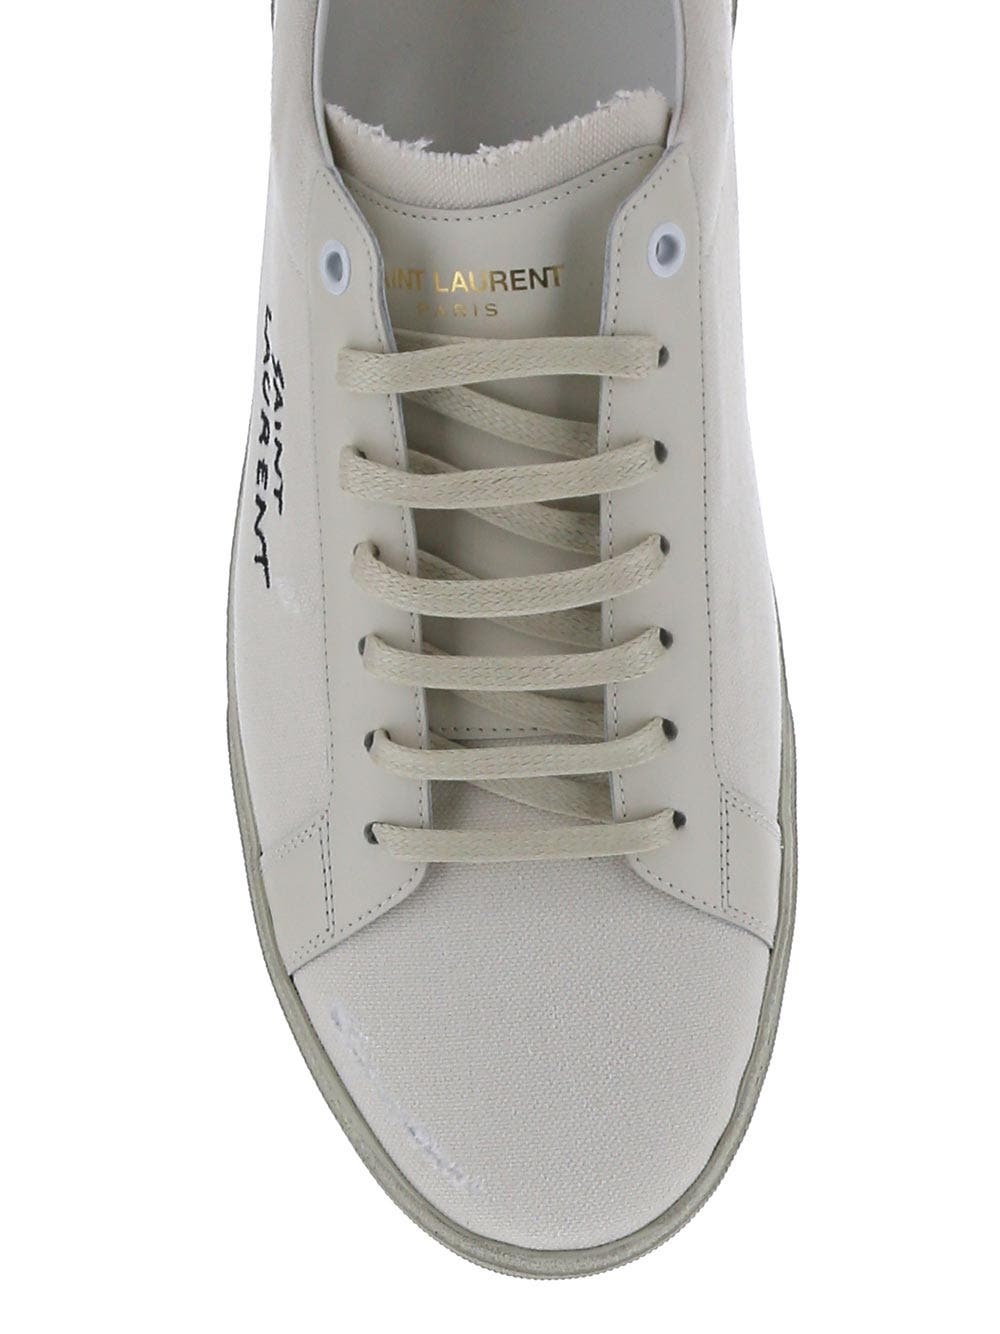 Court Classic SL/06 Embroidered Sneakers - 4